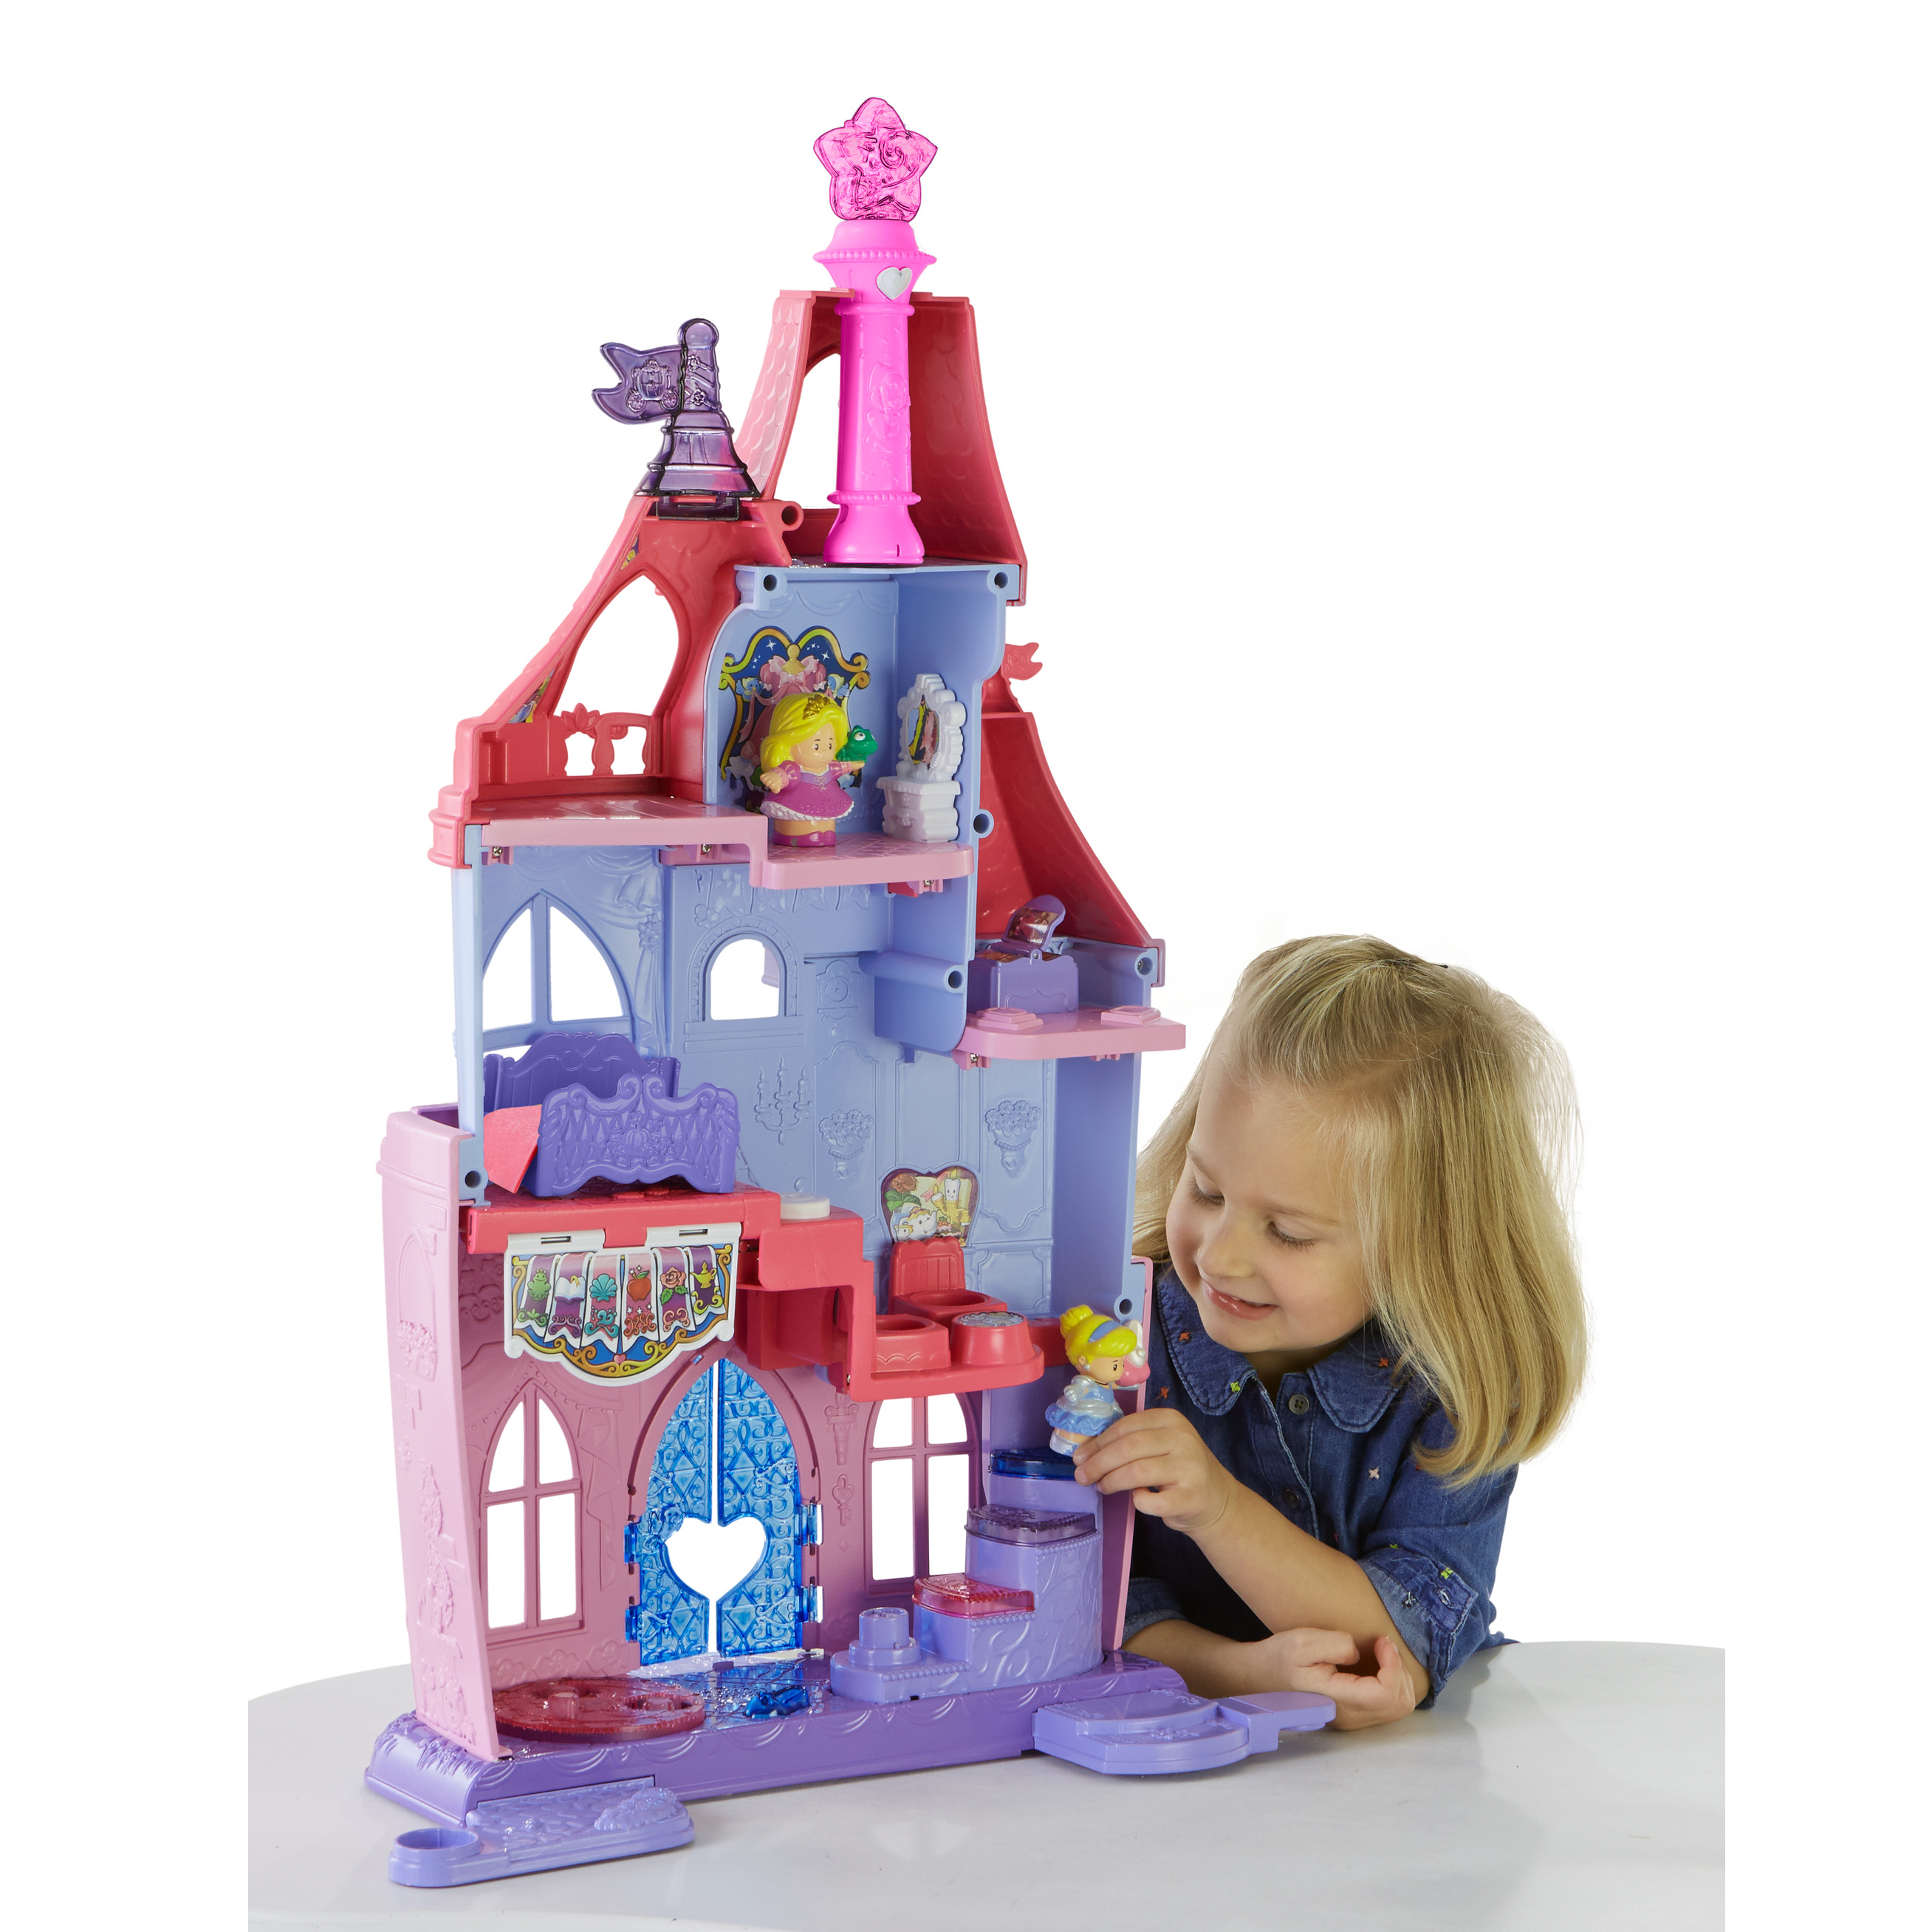 Disney Princess Magical Wand Palace By Little People Only $27.99! (Reg $49.94)